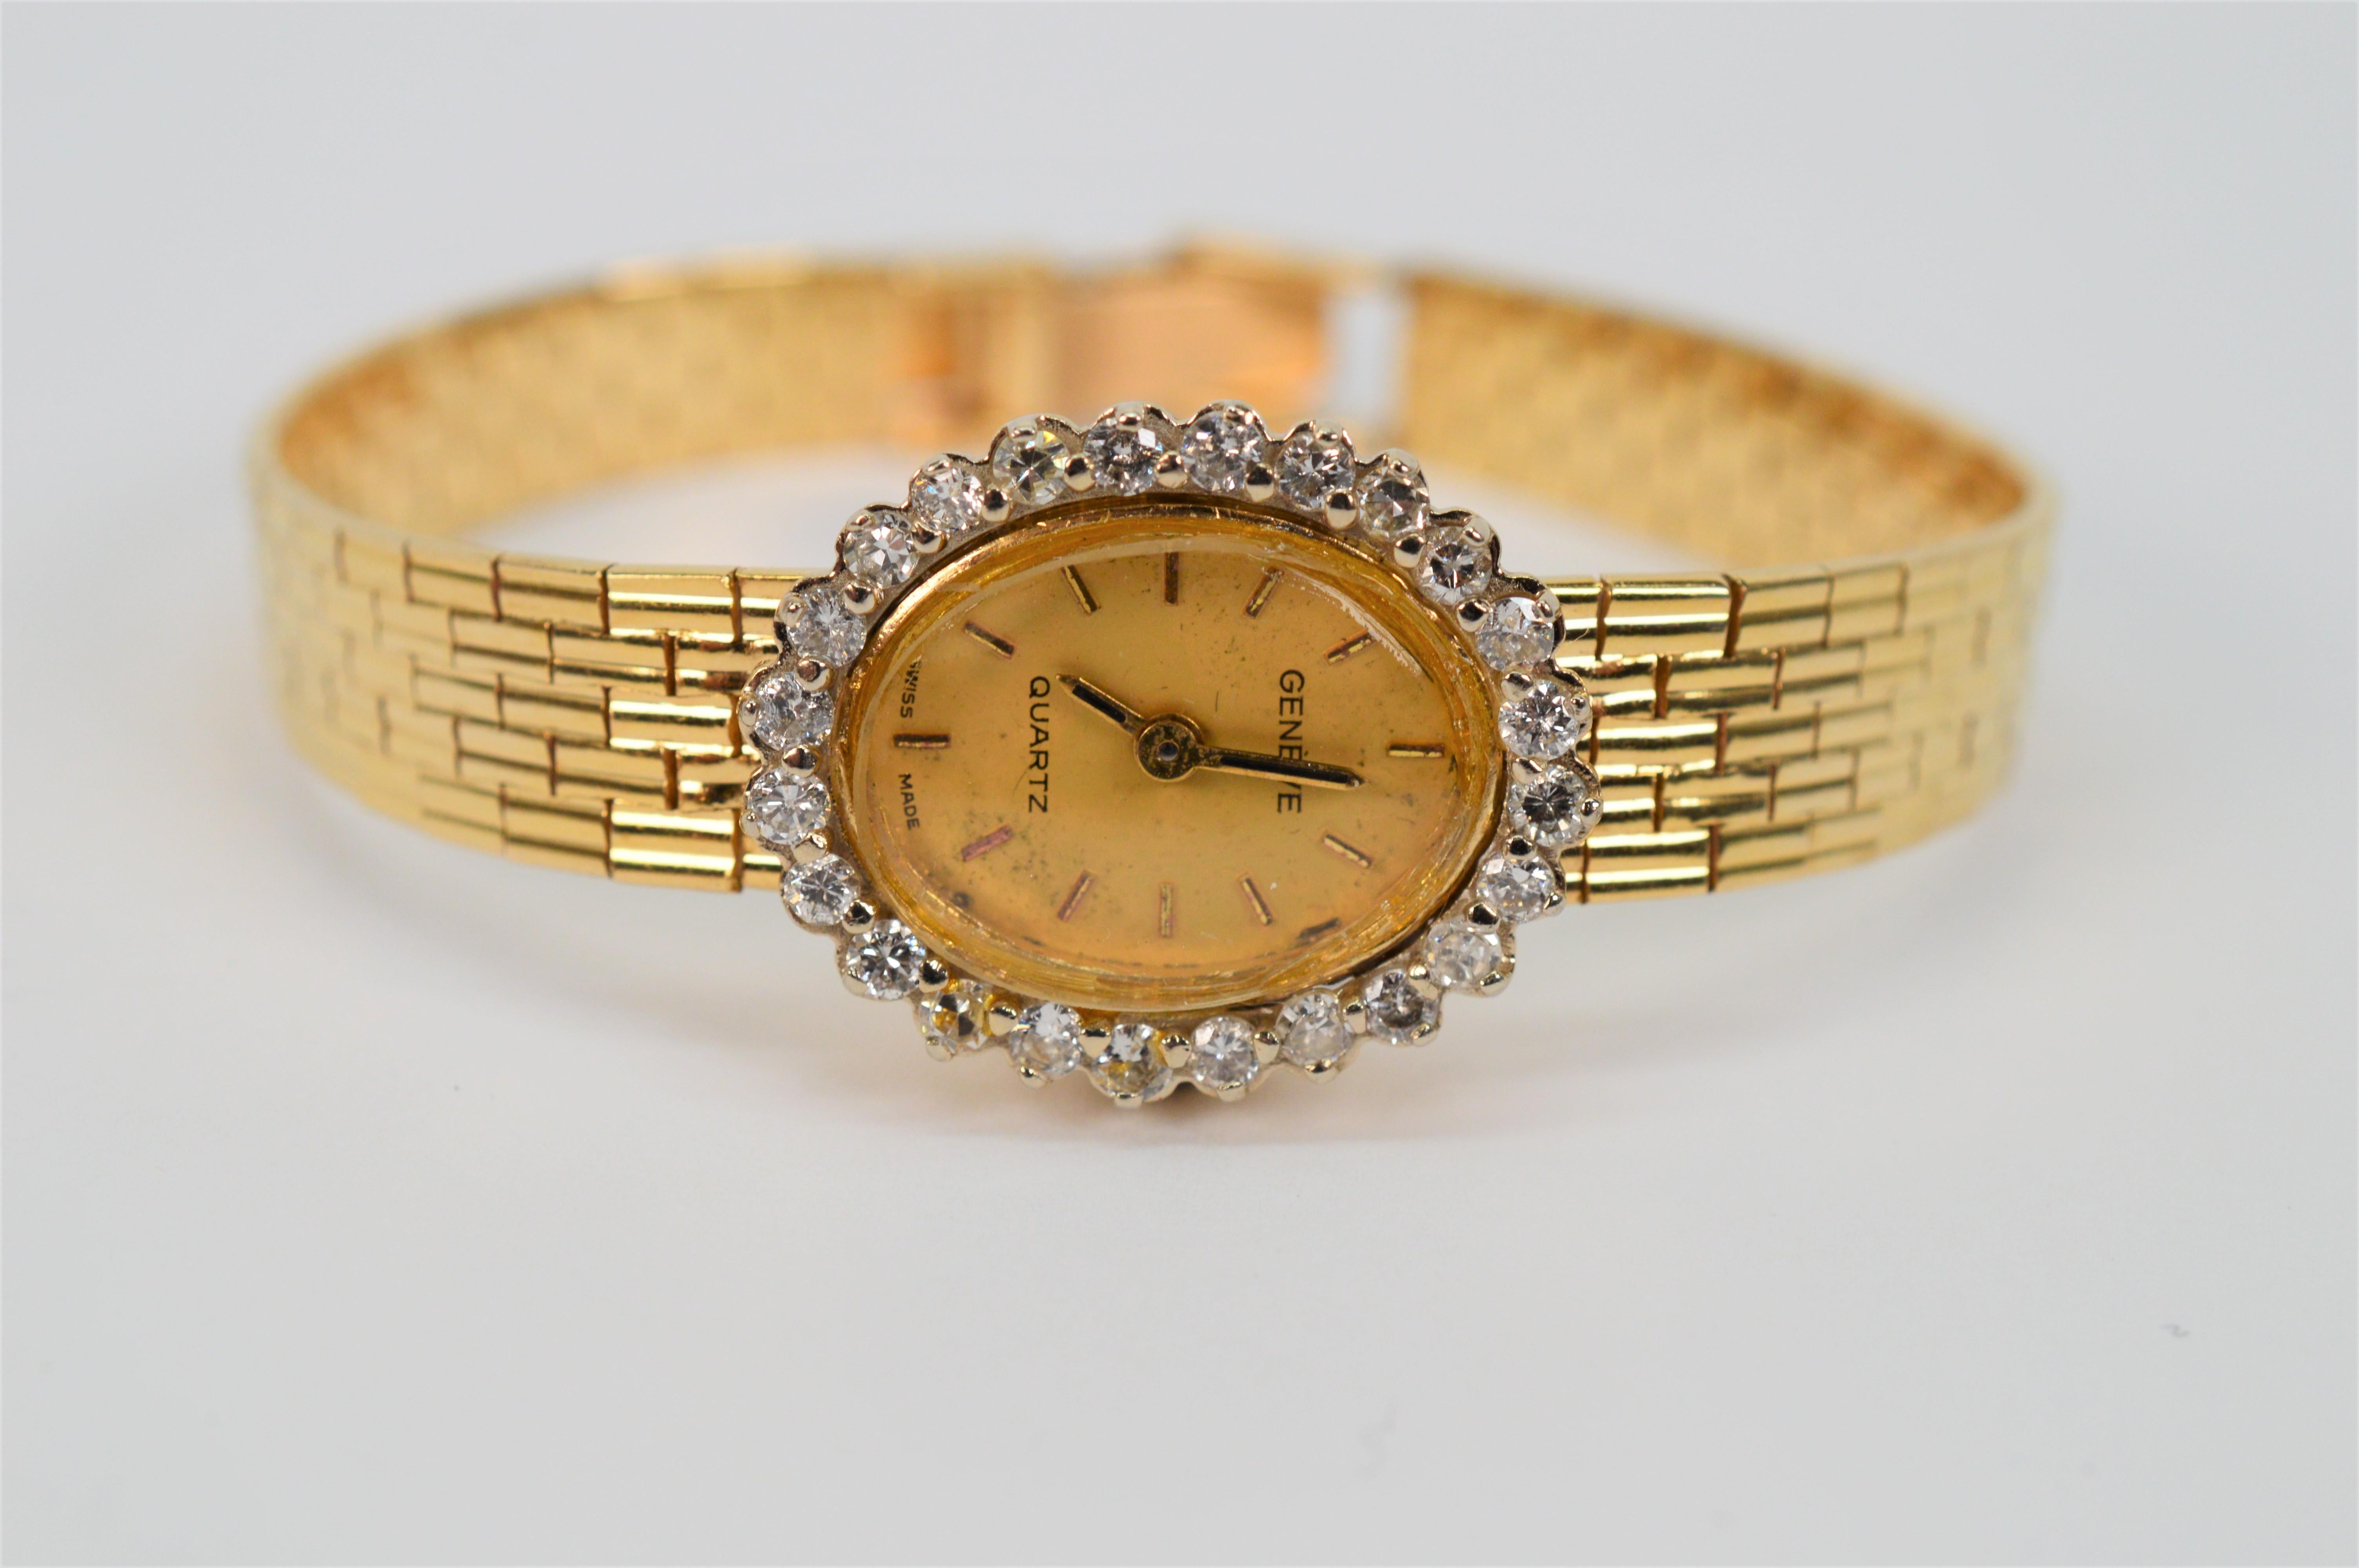 Circa 1960 Geneve with rich fourteen karat 14K yellow gold bracelet the fine ladies dress watch has a beautifully diamond framed oval face with .72 carat of H/I2 diamonds.  The watch has a quartz movement and fresh battery (number 364). The